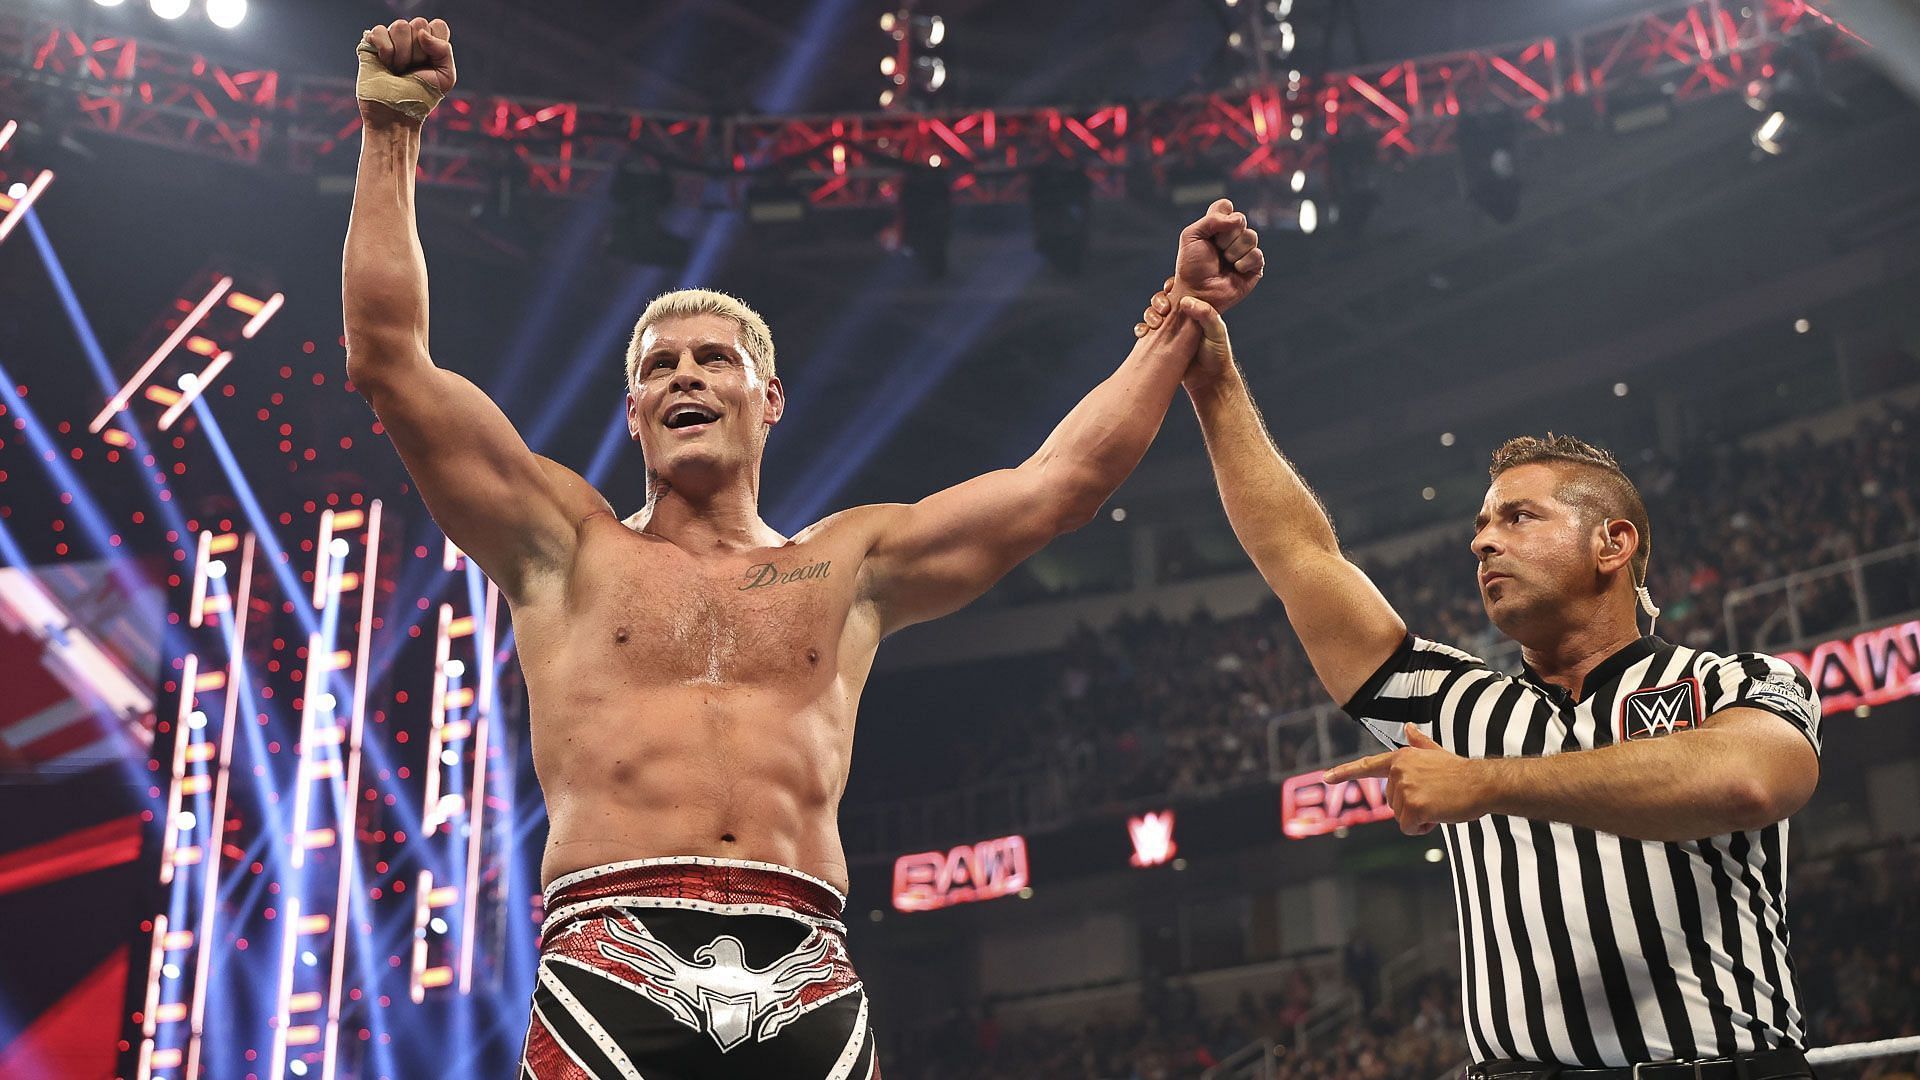 Cody Rhodes makes hilarious comment about son of WWE legend following RAW